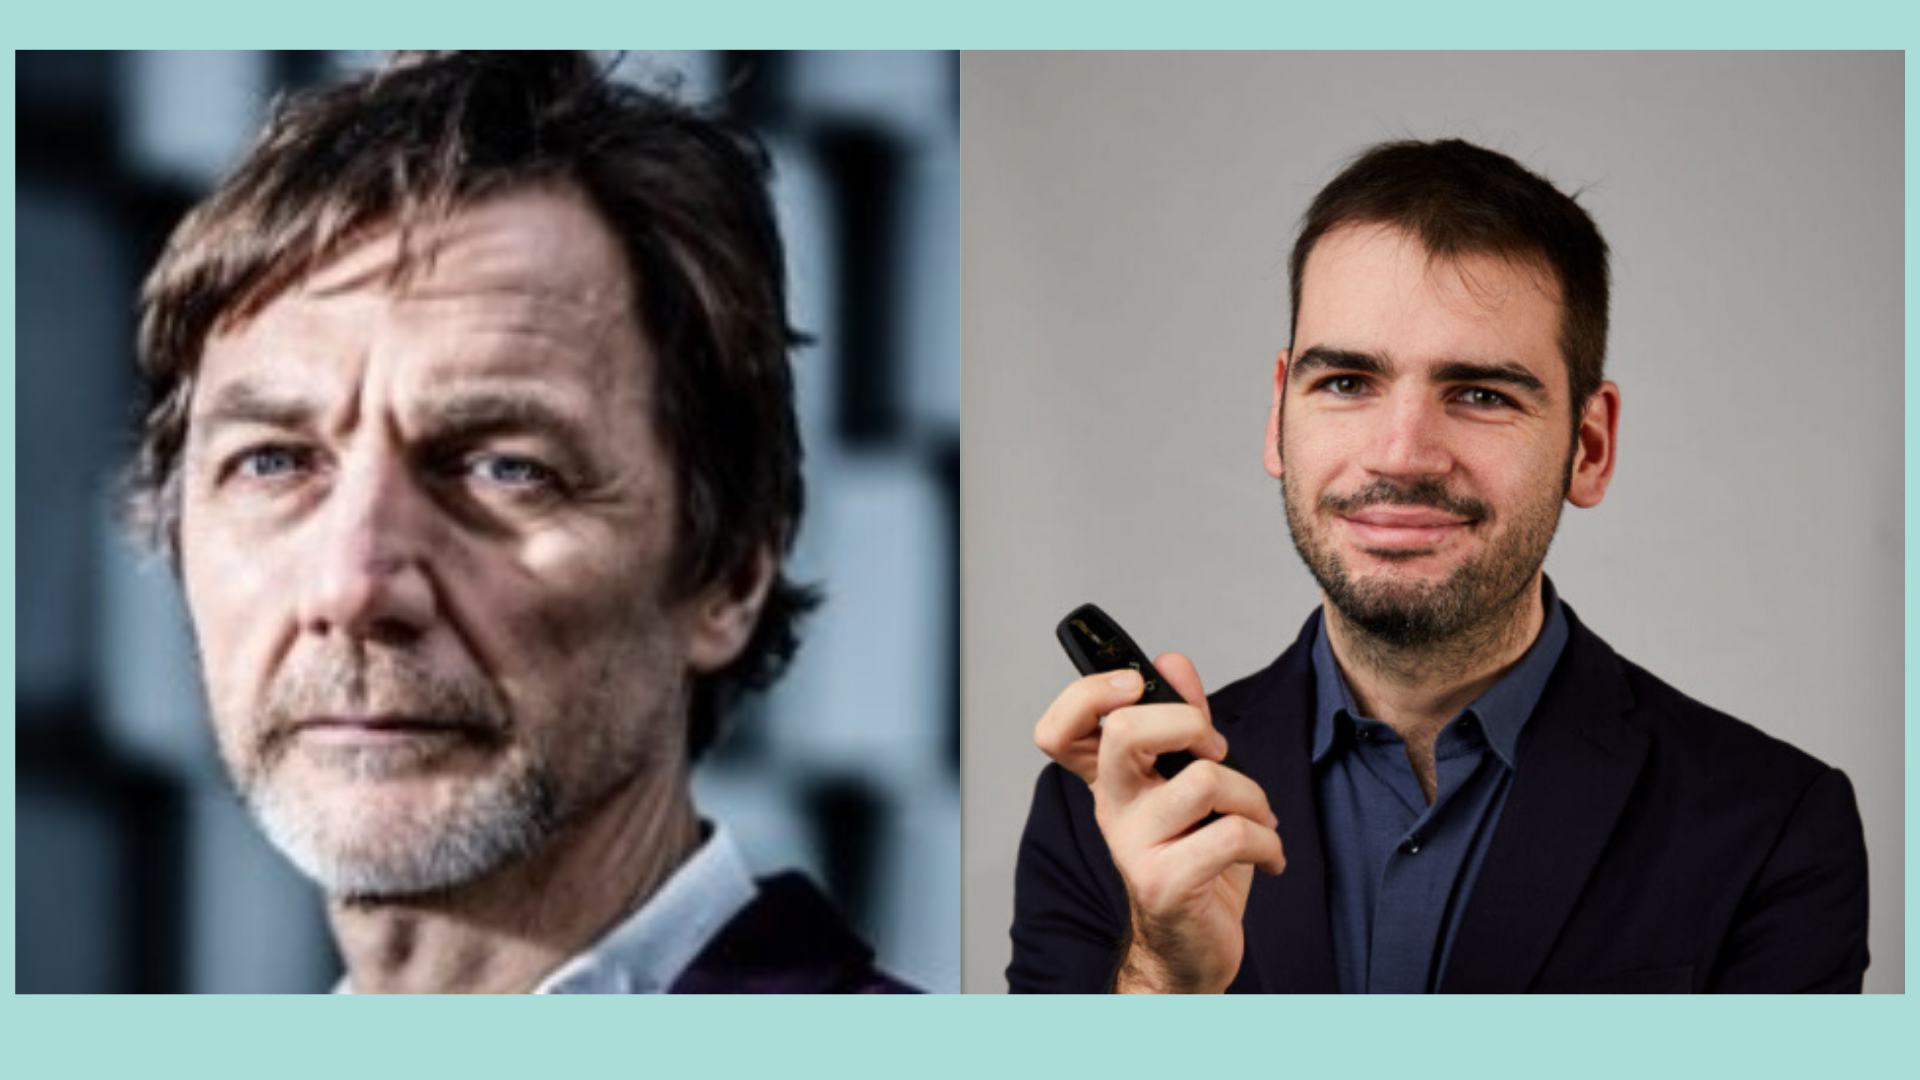 How to collect consent without creating consent fatigue?’: Paul De Hert and Gianclaudio Malgieri (Webinar, 4 June 2020)